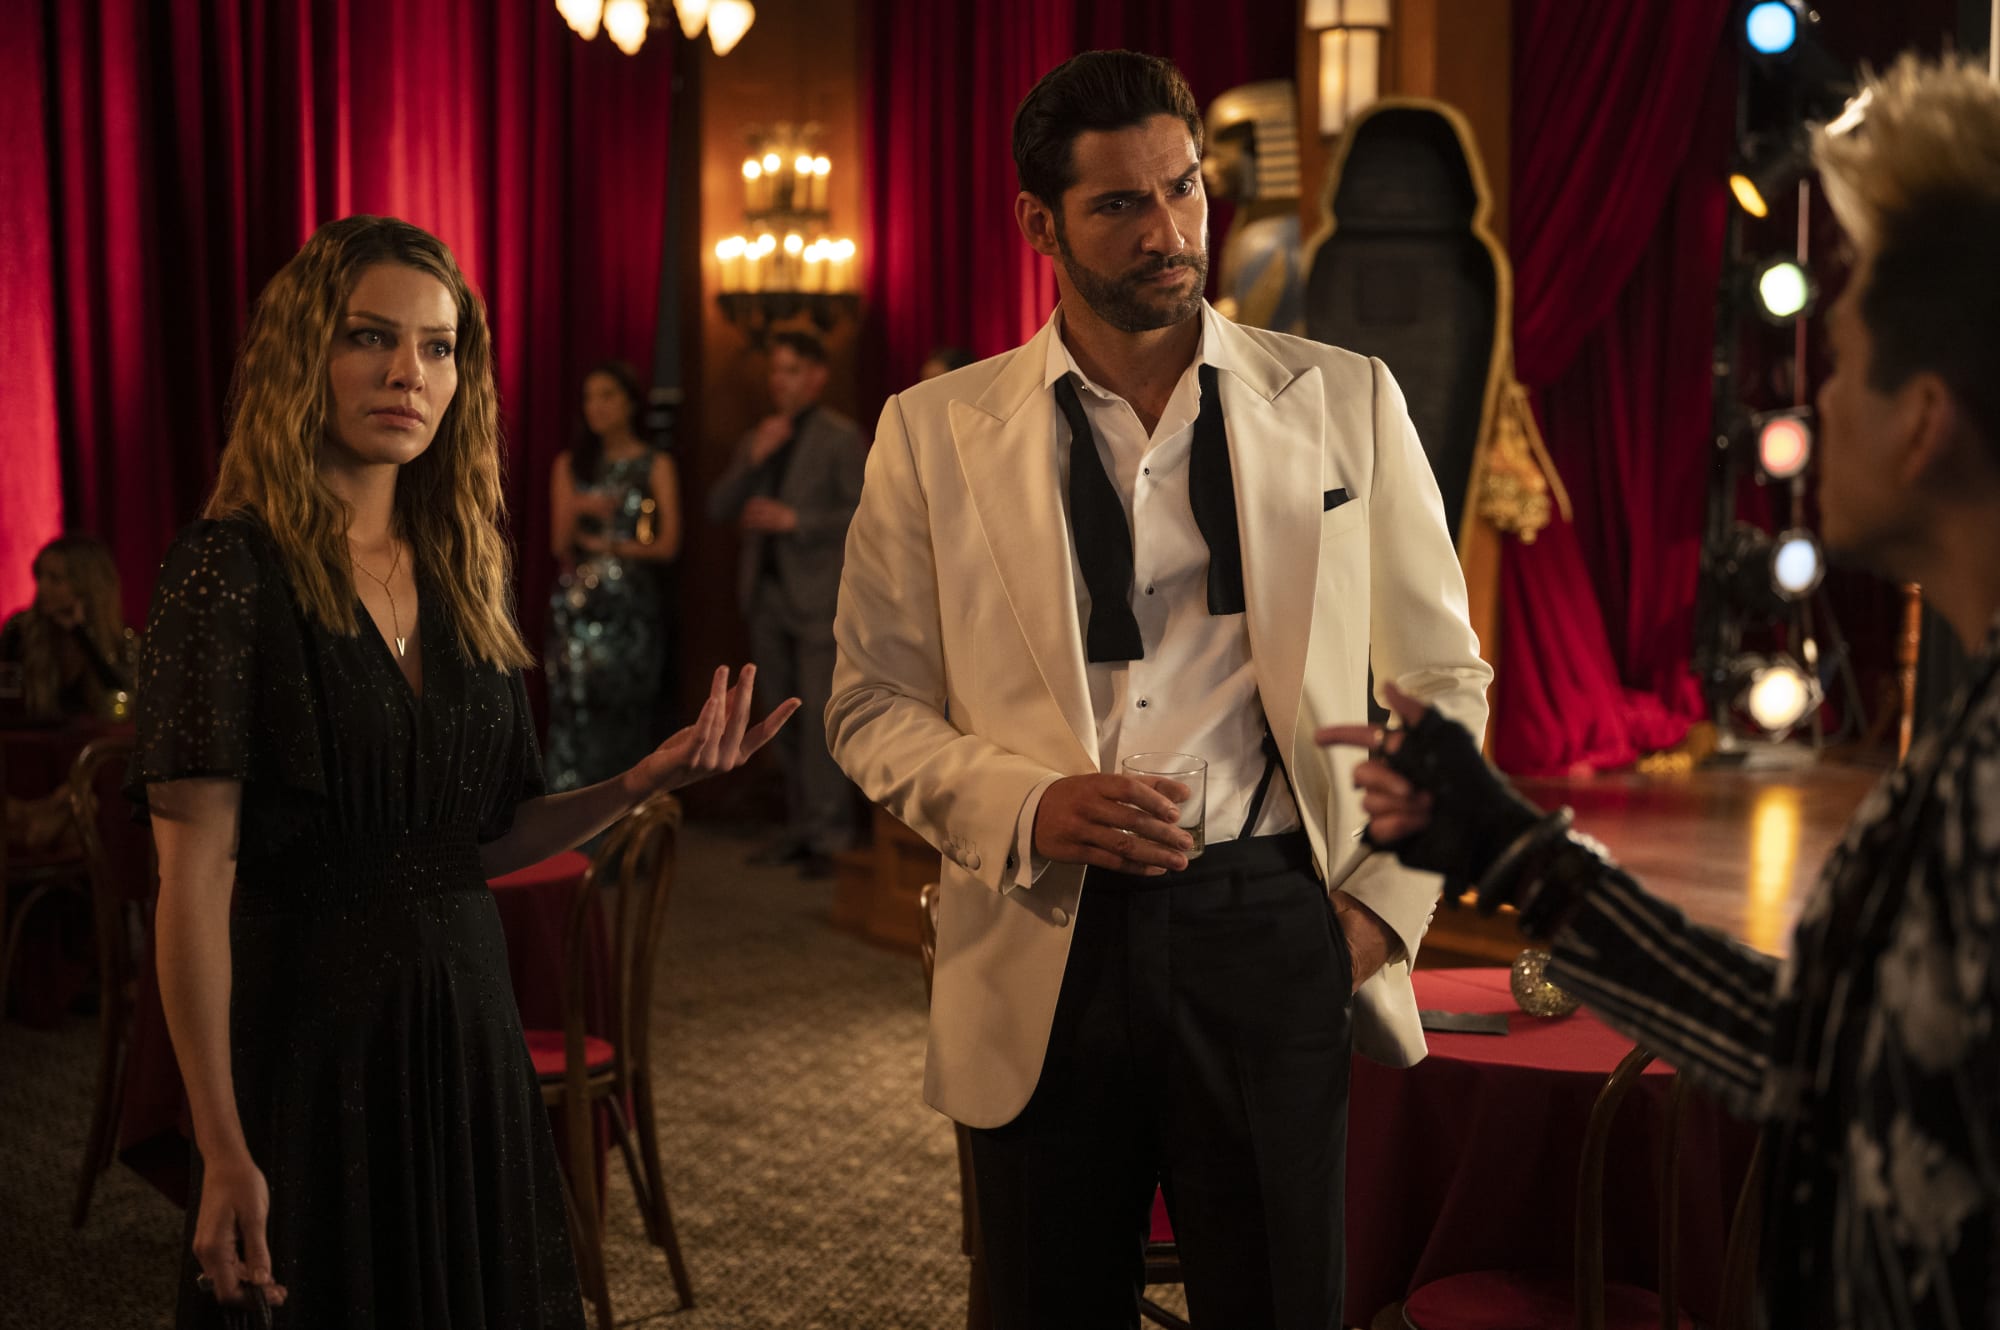 Lucifer season 6 release date, cast, trailer, synopsis and more